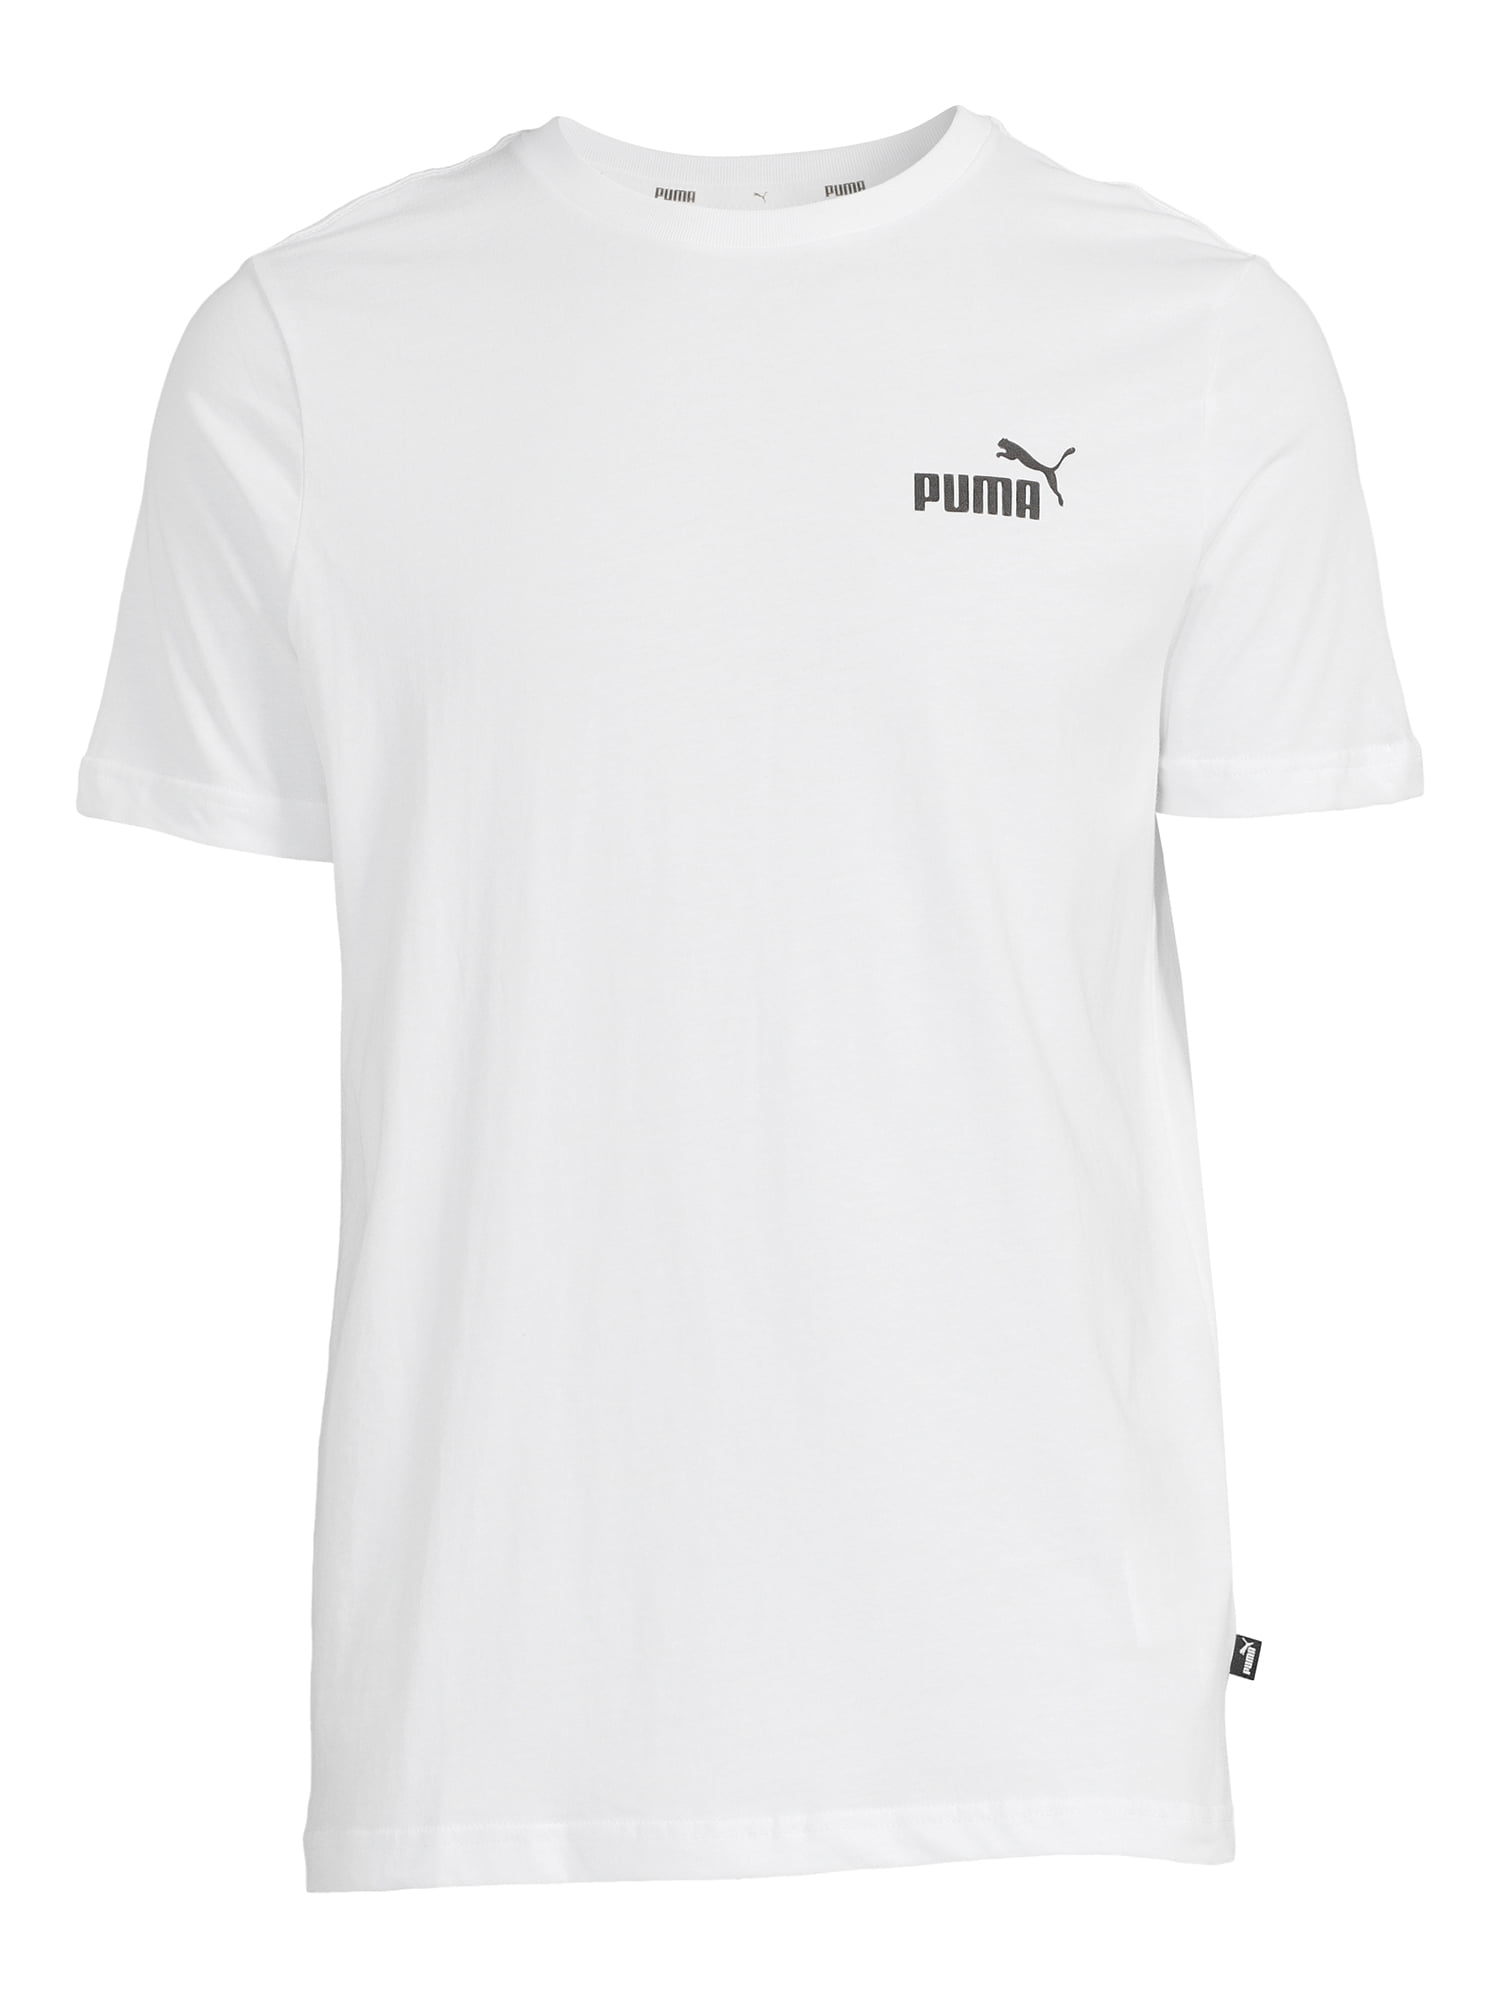 PUMA Men's and Big Men's Essential Chest Logo Tee Shirt, sizes S to 2XL